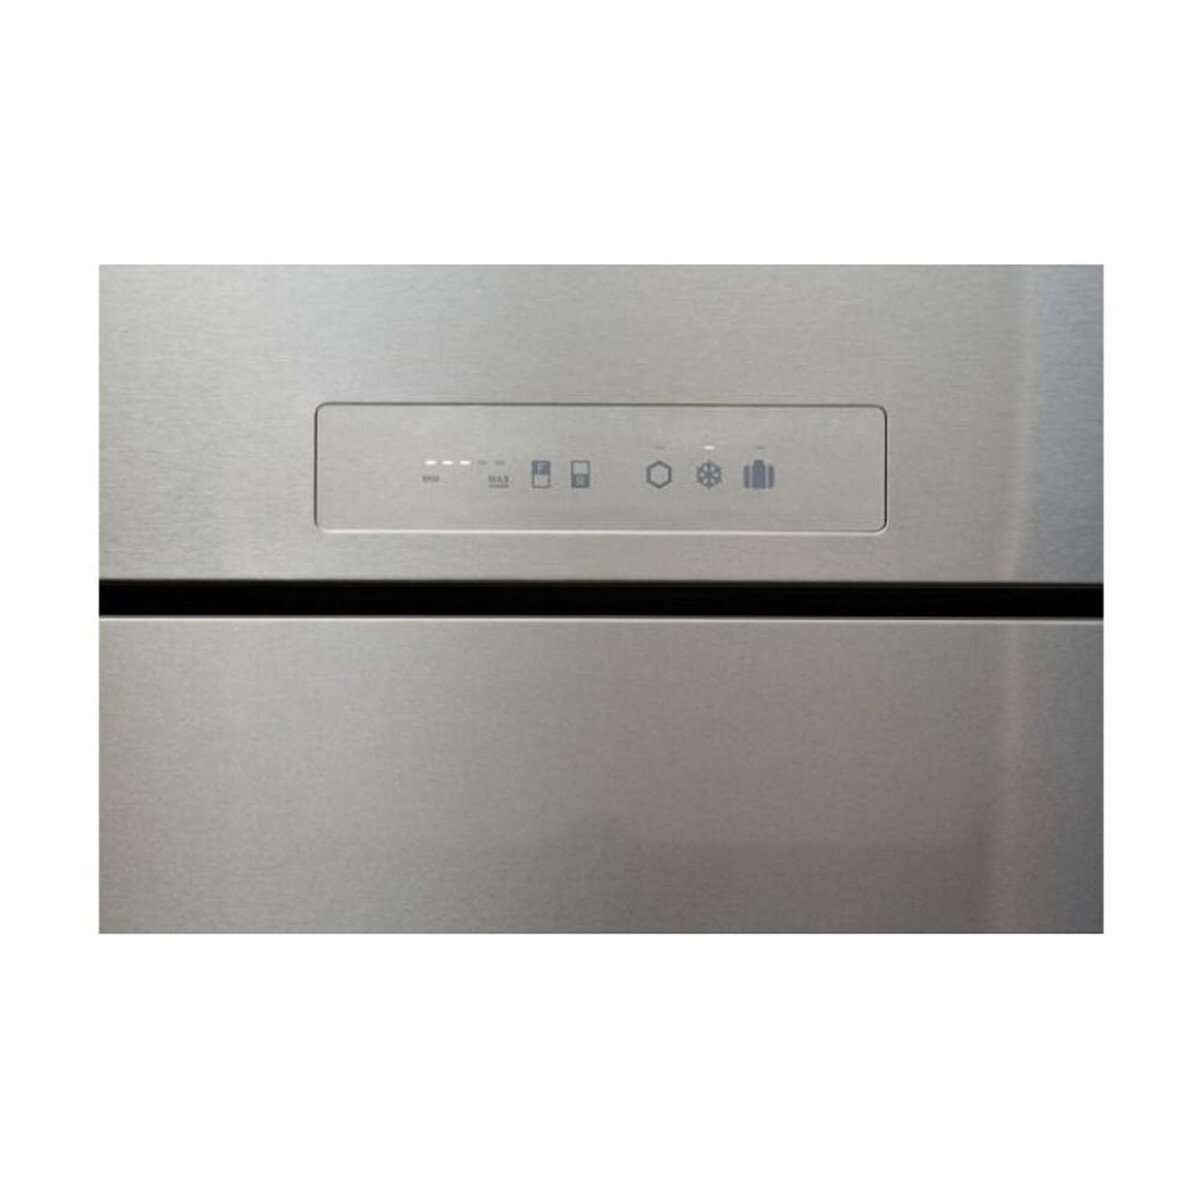 Sharp Double Door Refrigerator E-Pro Inverter Series 750LTR SJ-SMF750-BE3 Beige with Plasmacluster Made in Thailand